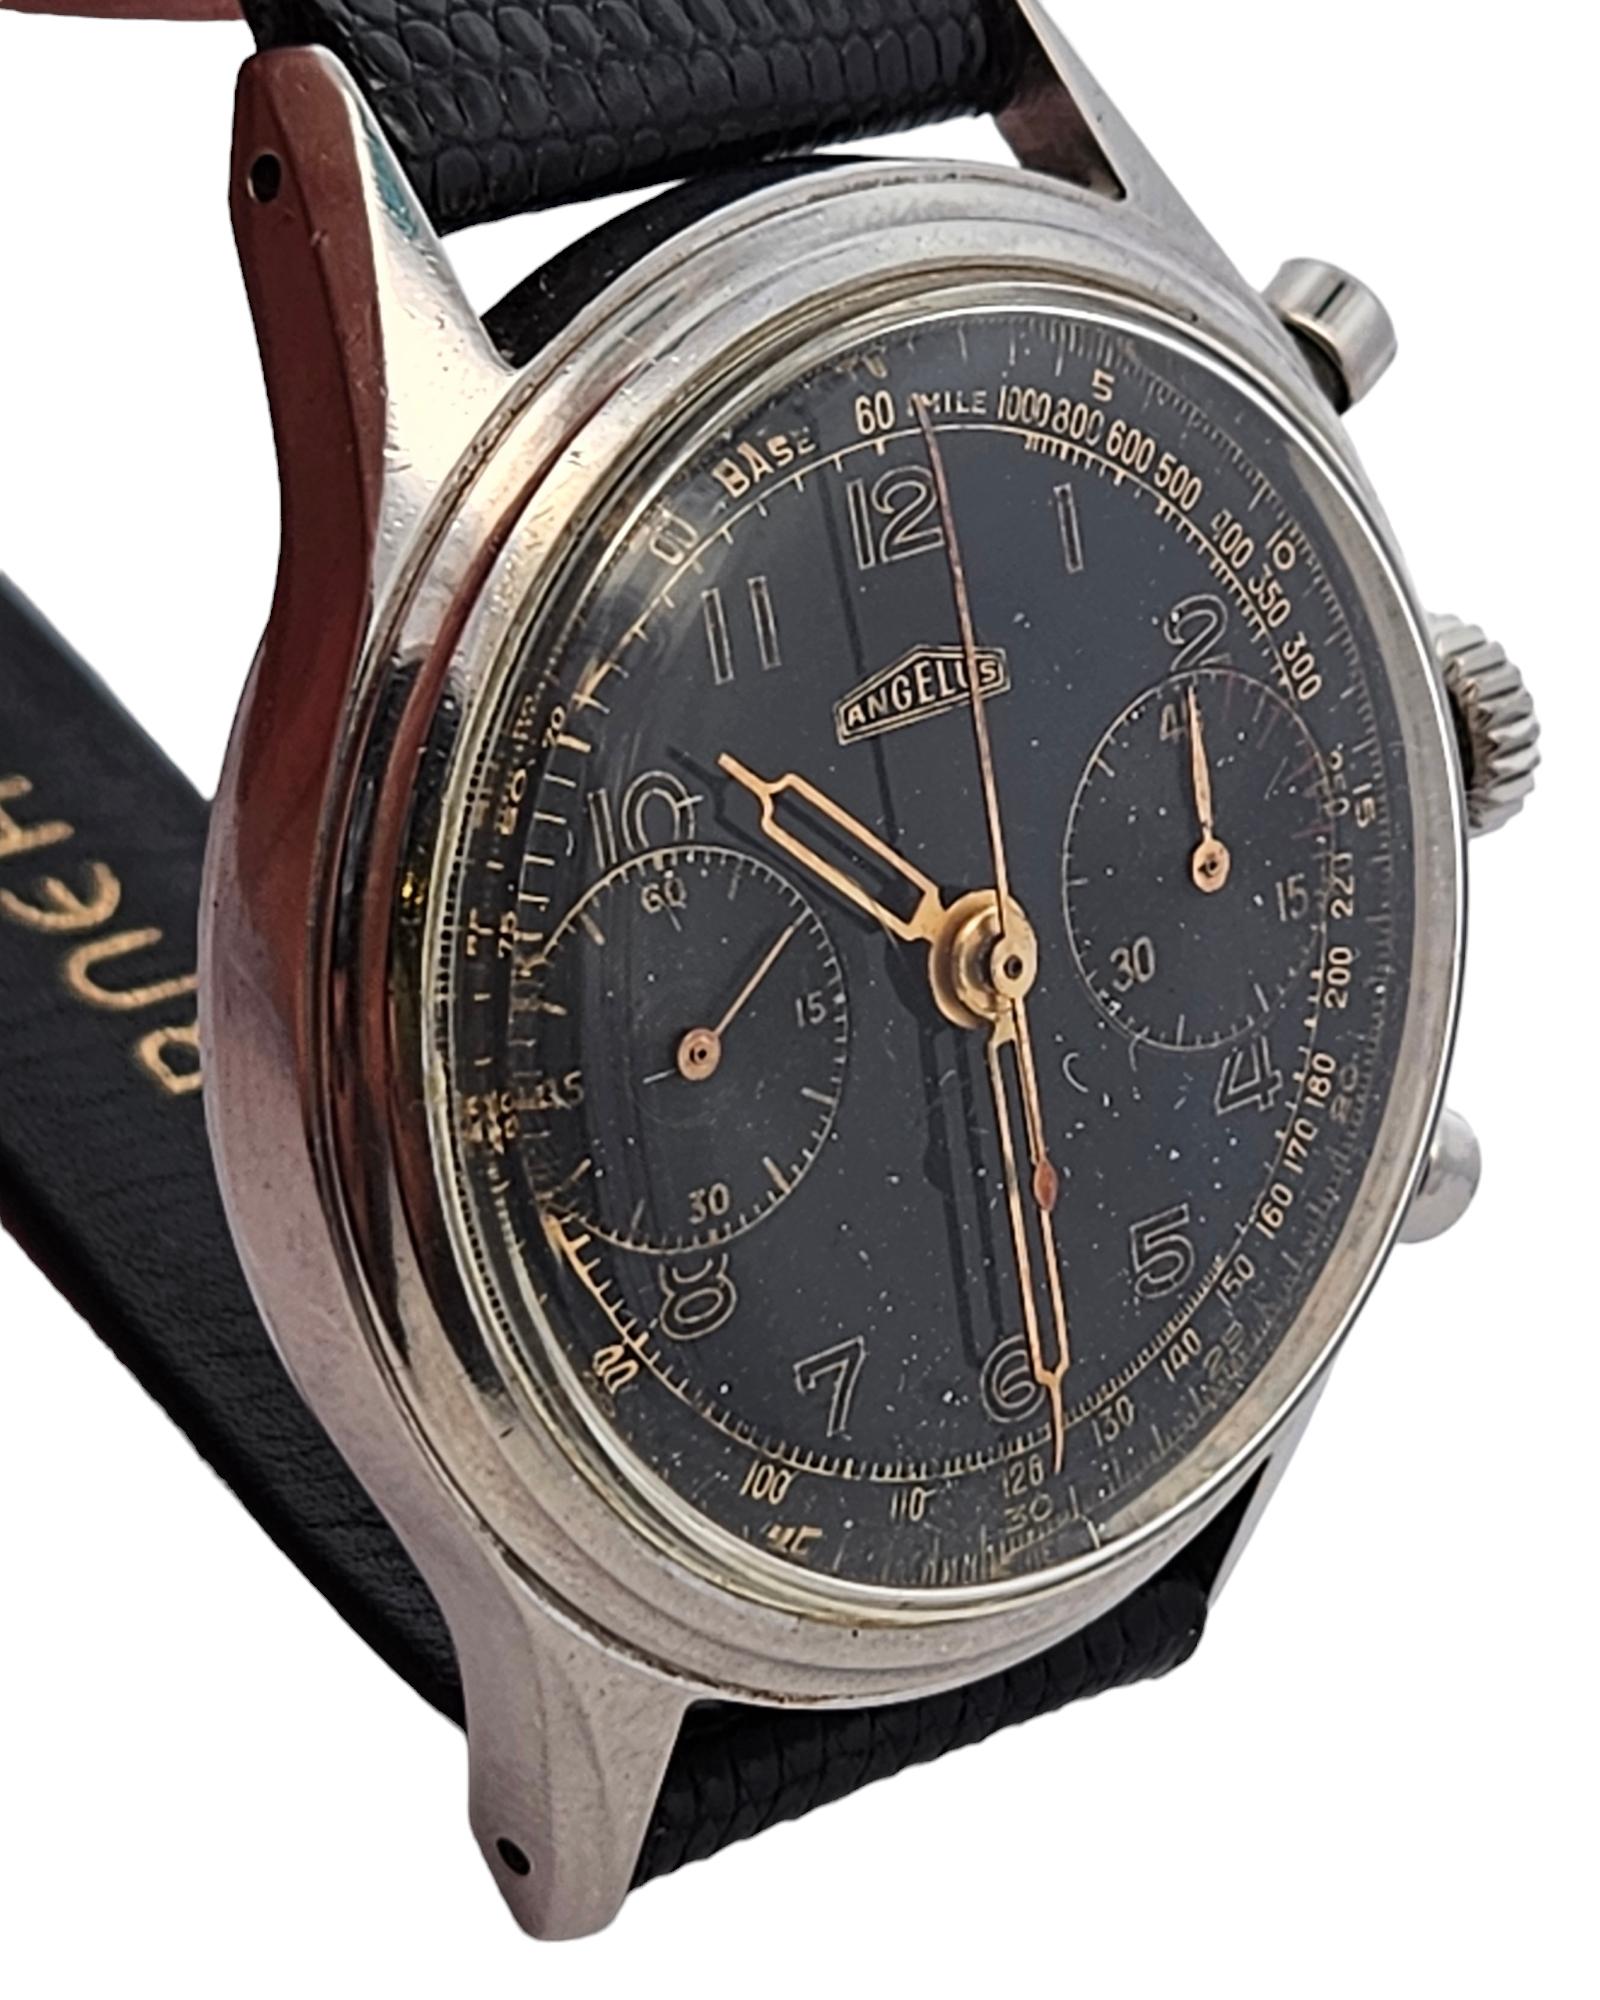 Angelus Chronograph Wrist Watch

Movement : Mechanical Manual Winding Angelus Caliber 215

Dial : Gilt Dial

Case : Stainless Steel 38.2 mm

Total Weight including strap : 54.5 Gram

Angelus Vintage Chronograph in stainless steel
Cal. 215 / Year of